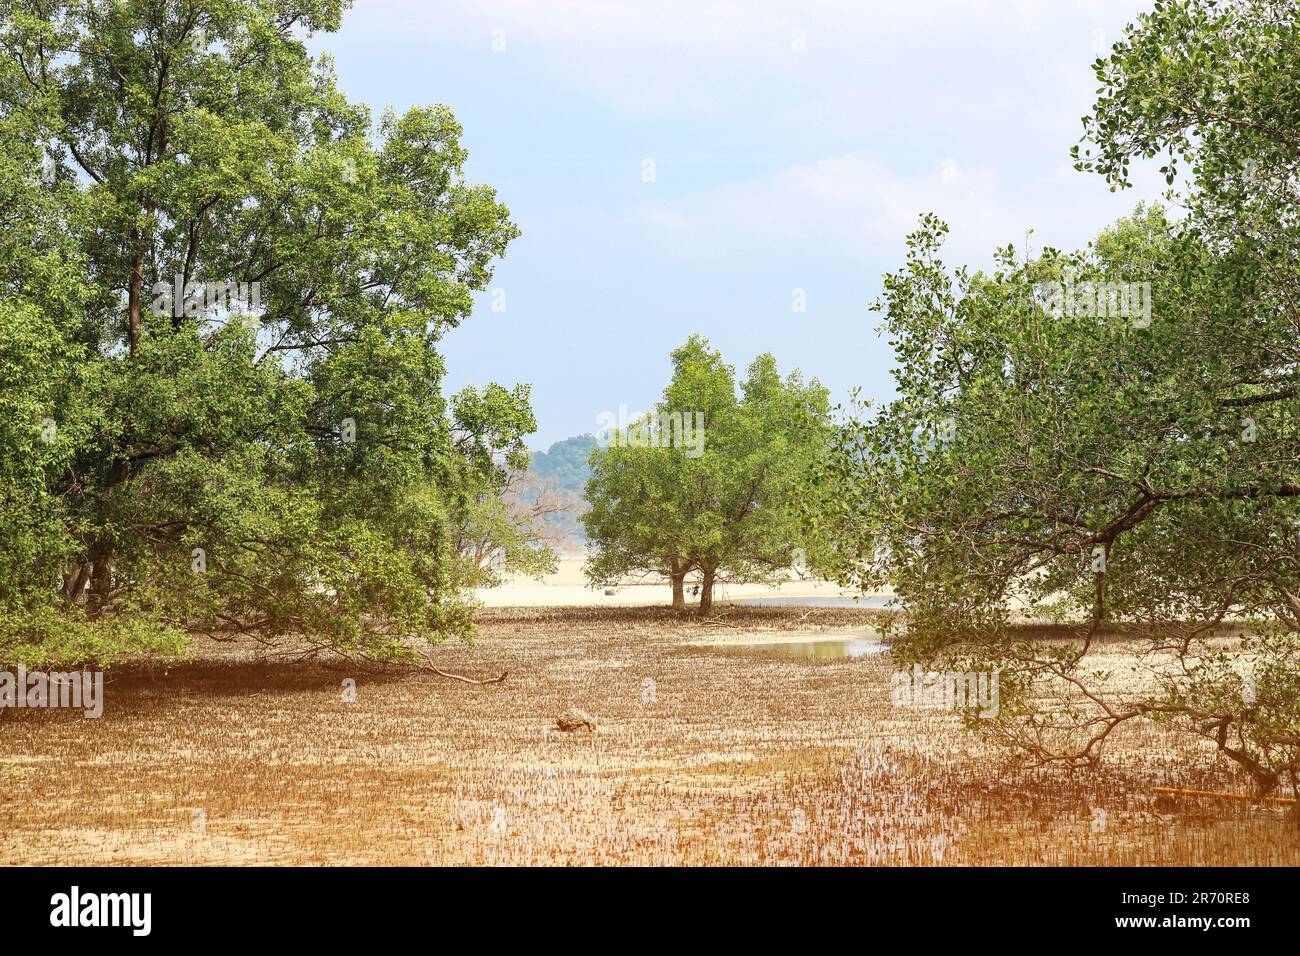 Trees grow from the sand, aerial root sprouts, low tide on the sea in a shallow bay, summer landscape. Stock Photo